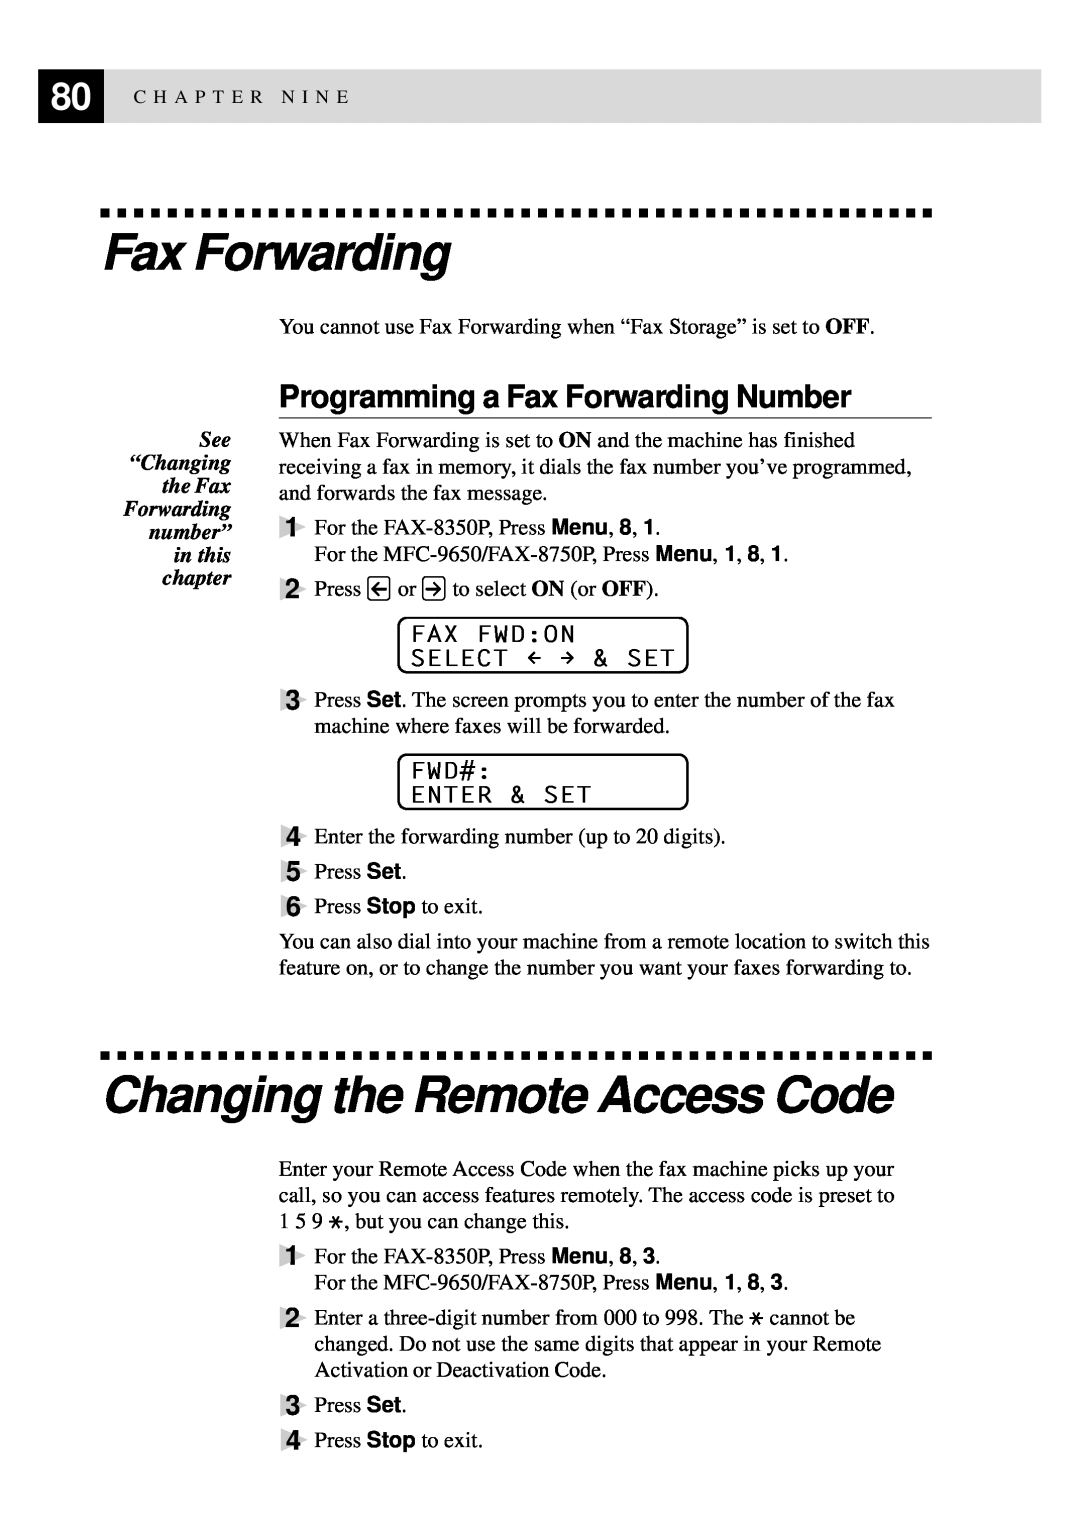 Brother FAX-8350P Changing the Remote Access Code, Programming a Fax Forwarding Number, Fax Fwdon Select & Set 